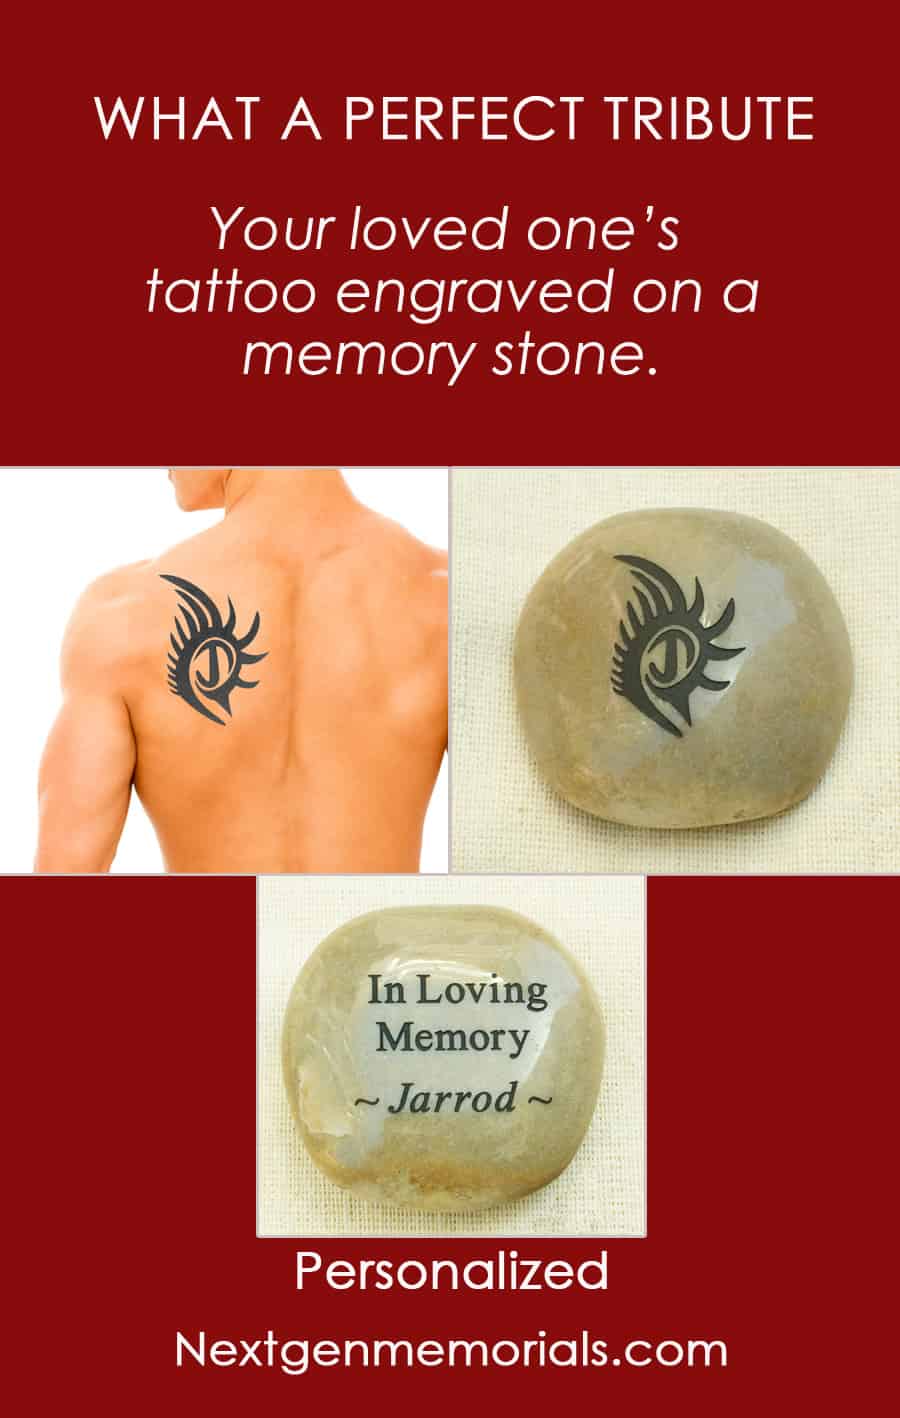 Your loved one's tattoo engraved on a Memory Stone